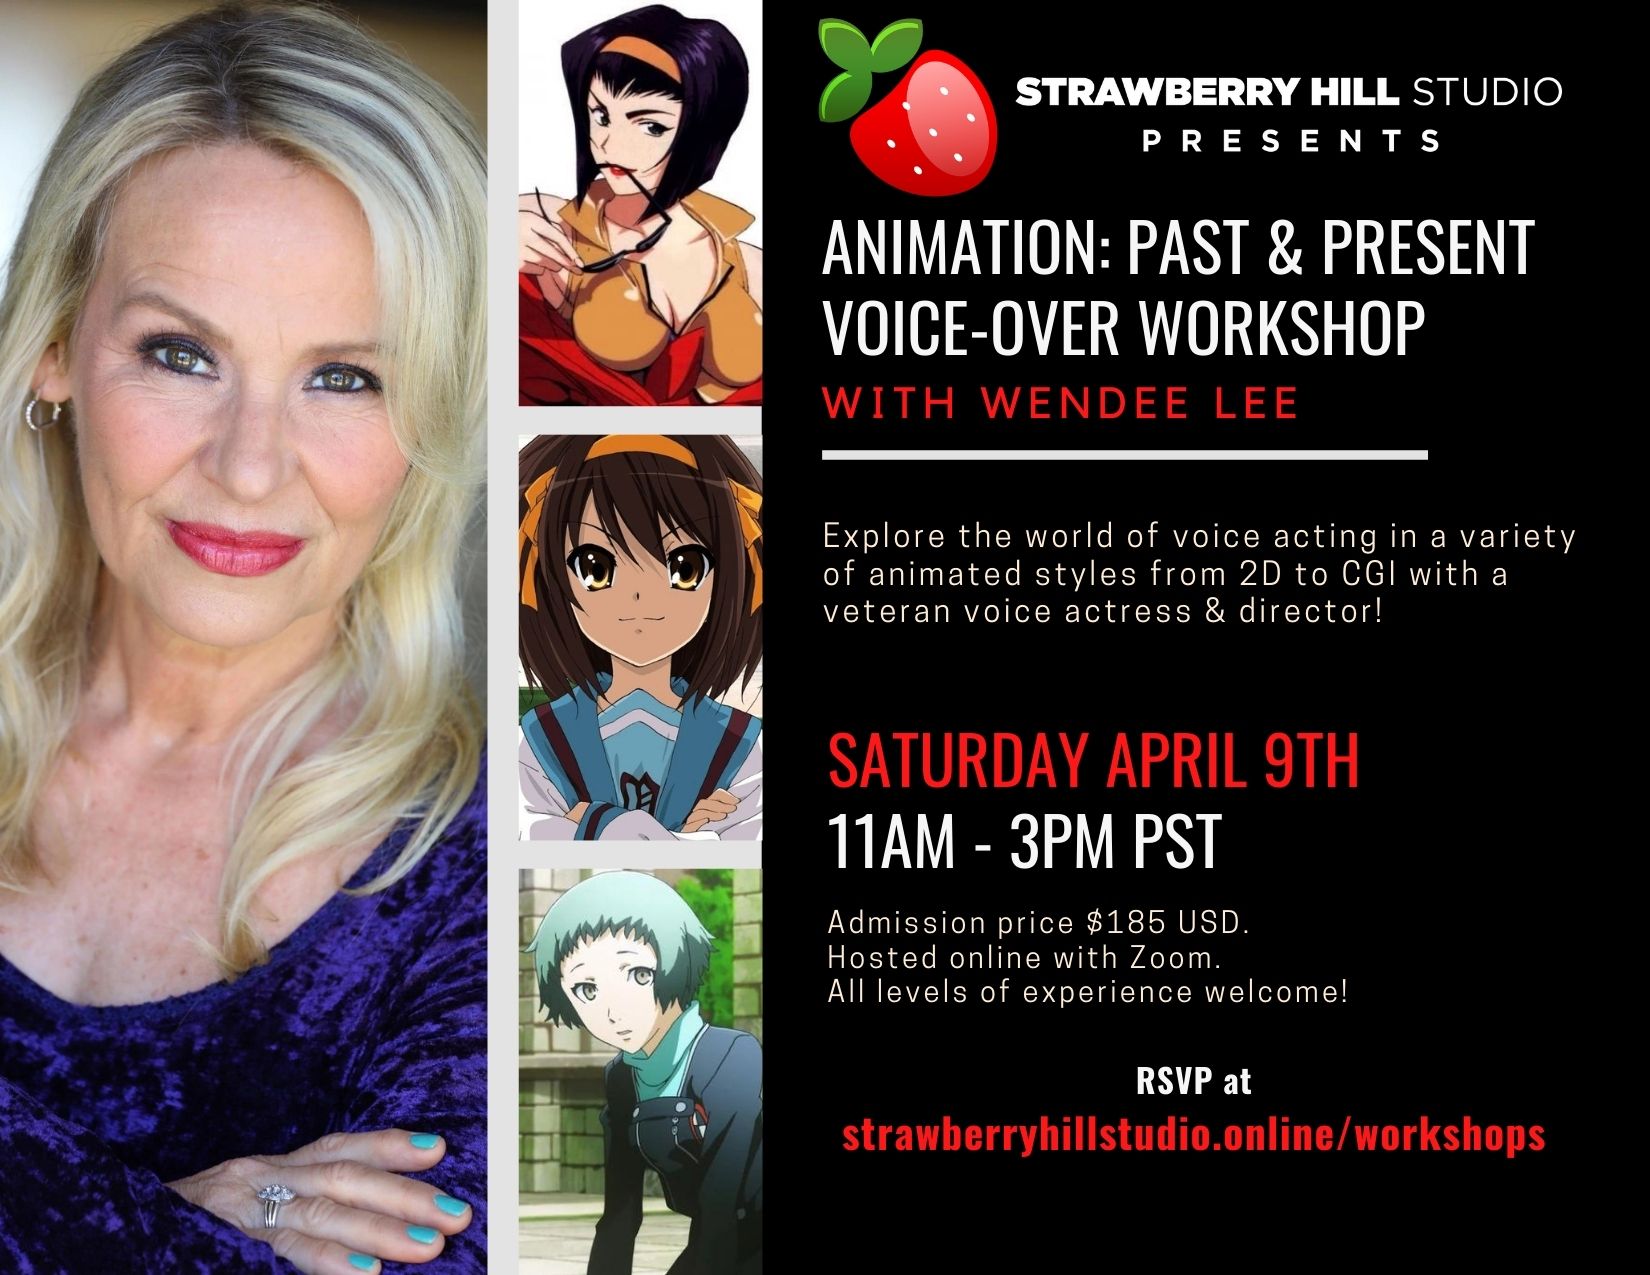 Animation: Past & Present Voice-Over Workshop w/ Wendee Lee